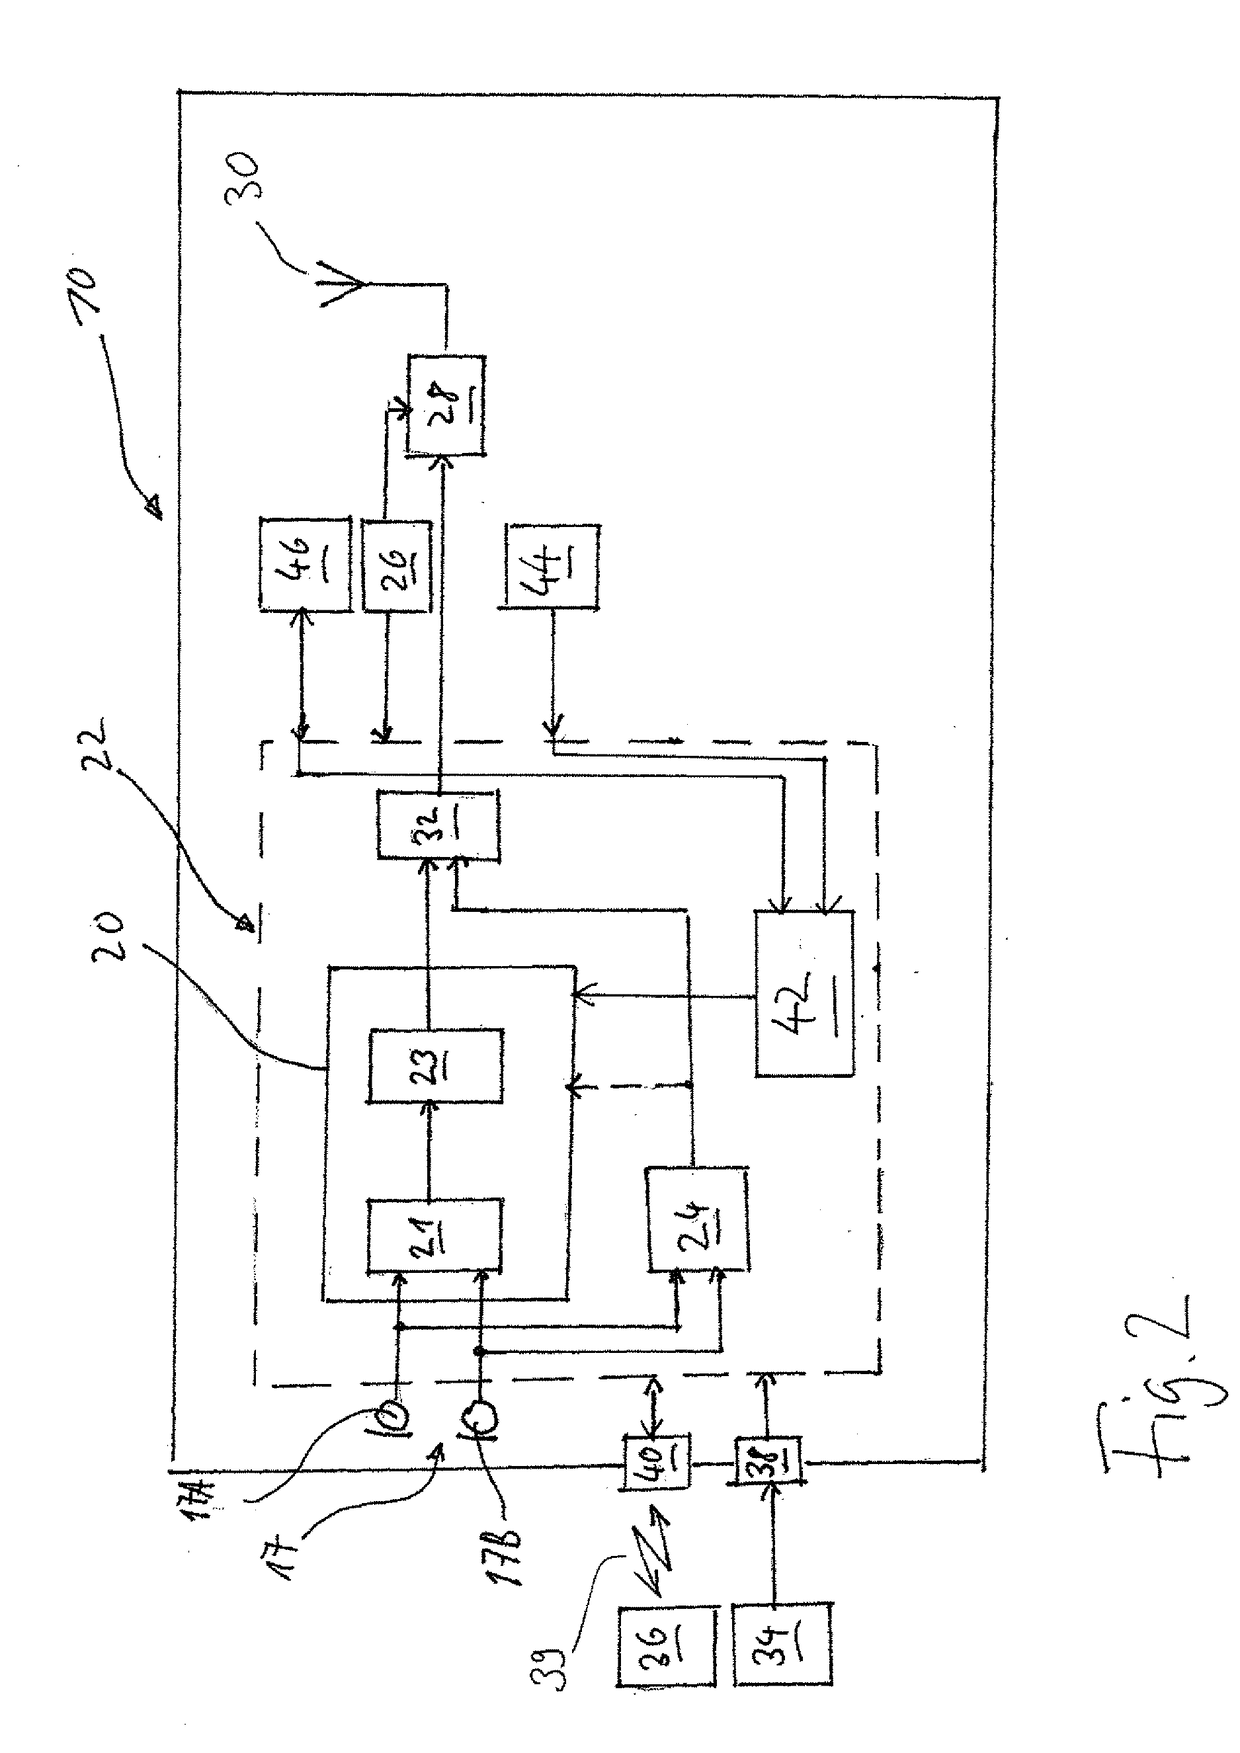 Hearing assistance system and method